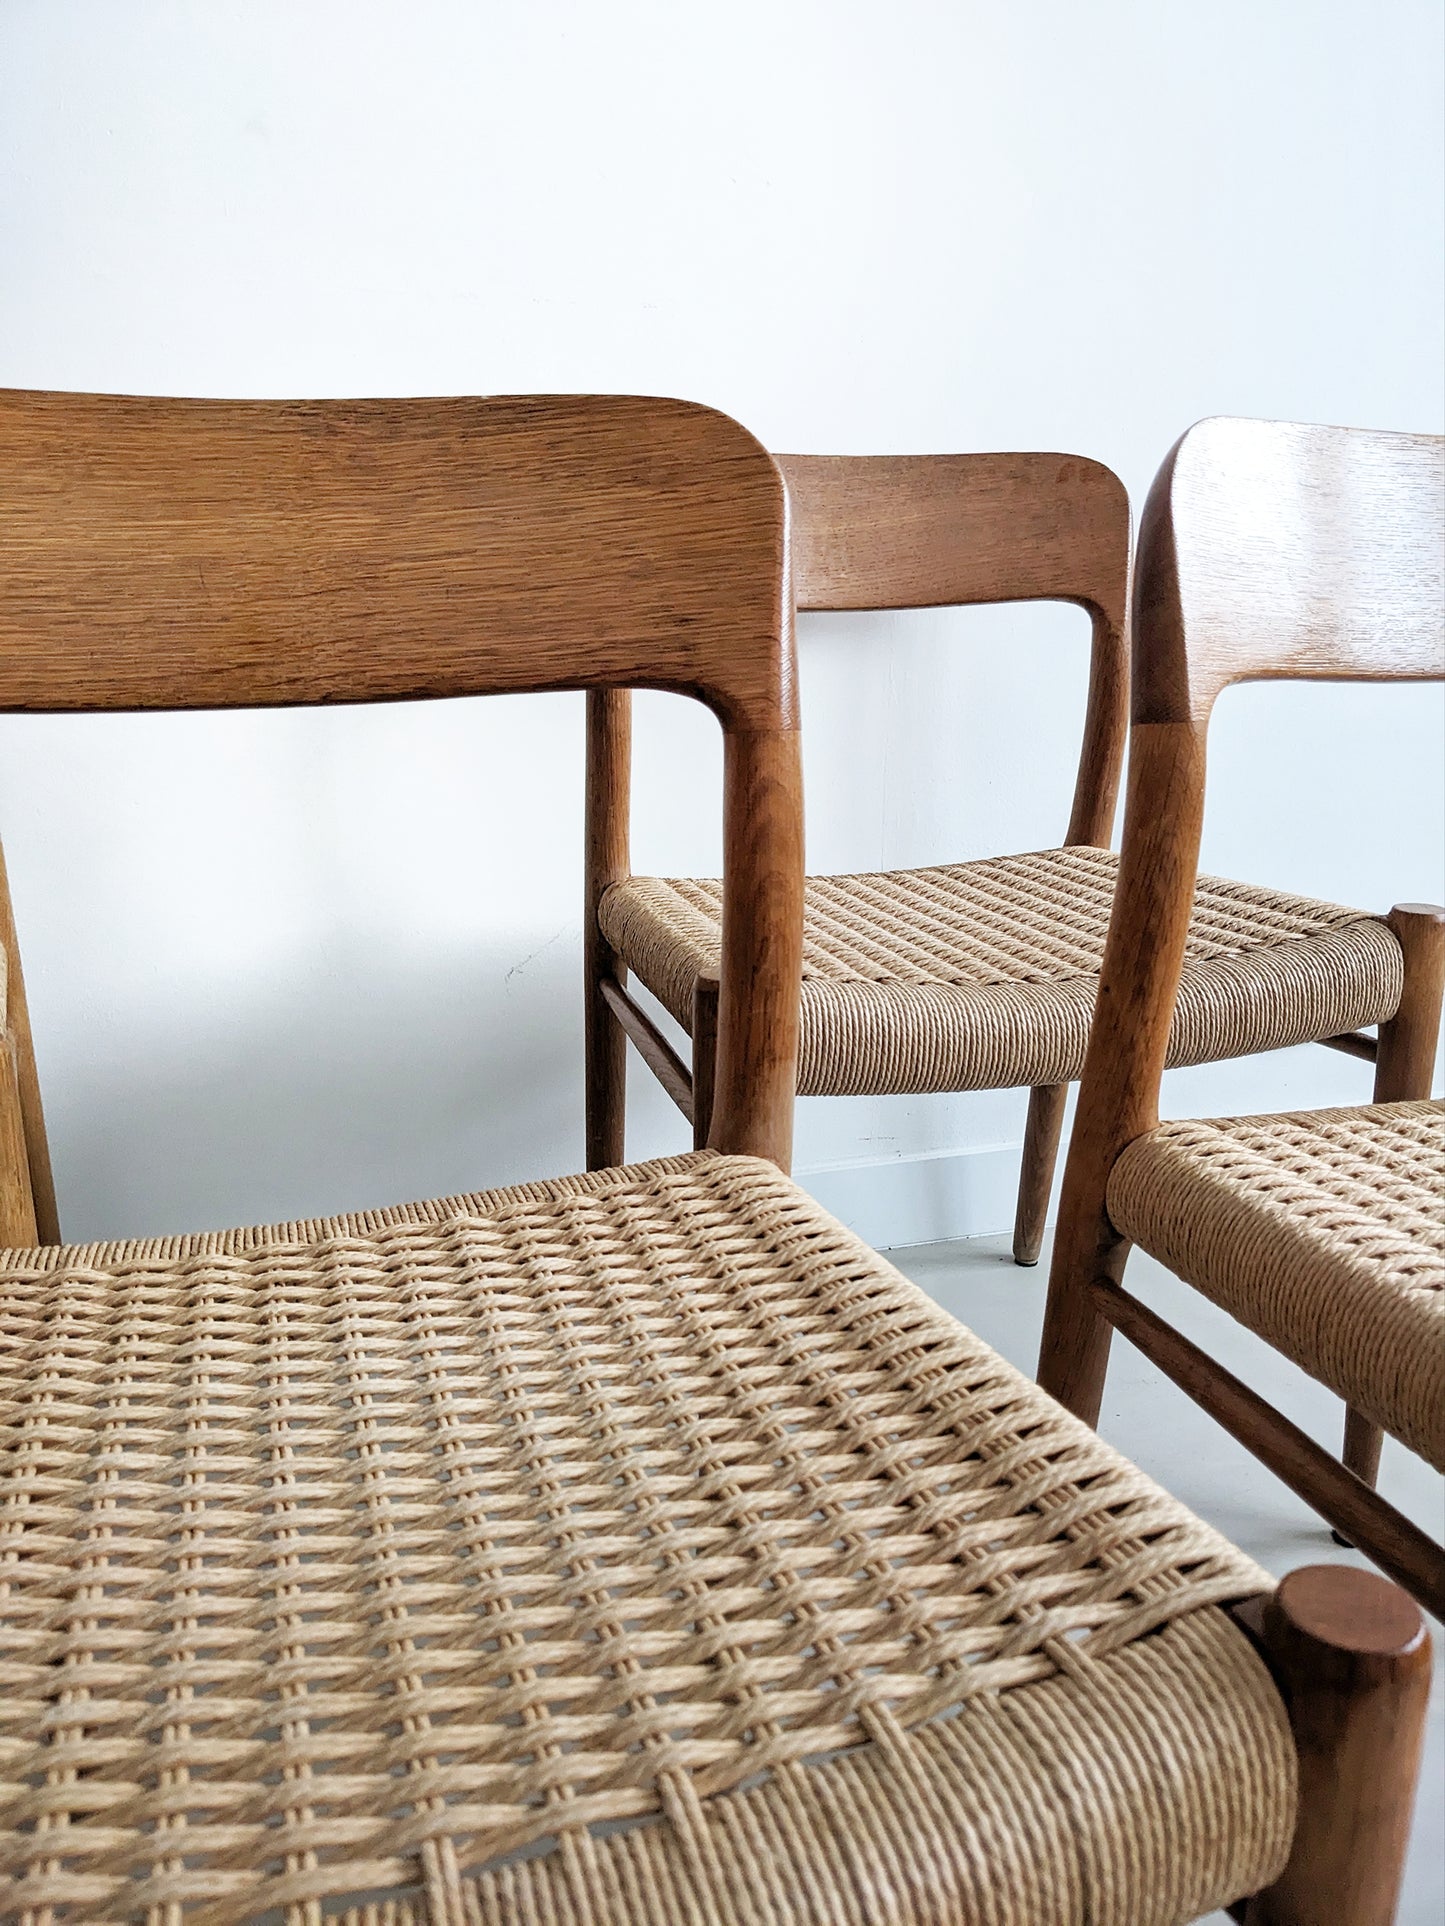 Set of 4 Niels Otto Møller Chairs 'Model 75' 1950's